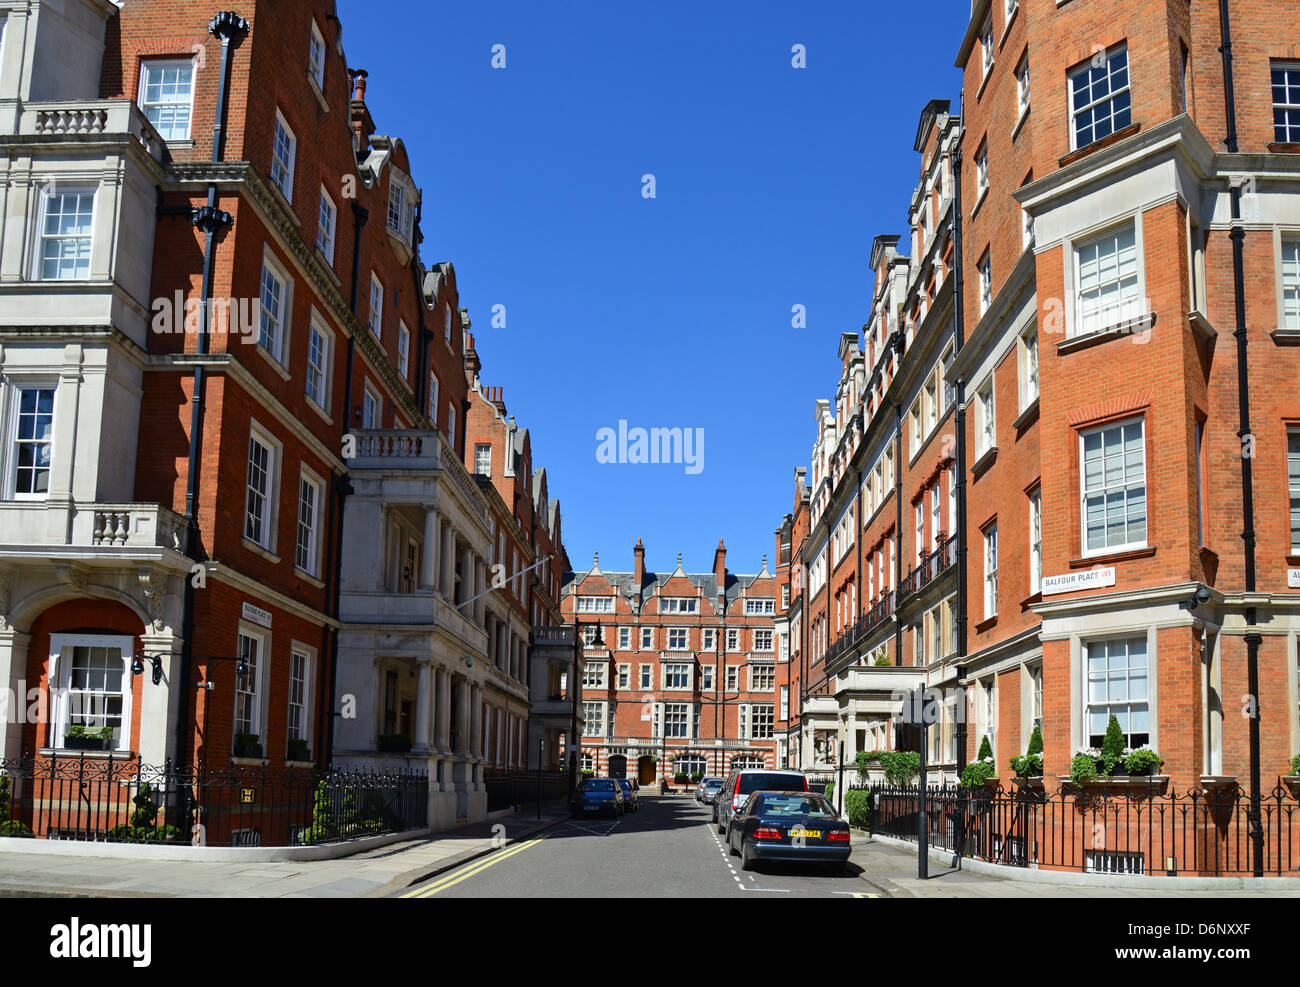 Balfour Place, Mayfair, City of Westminster, London, England, United Kingdom Stock Photo